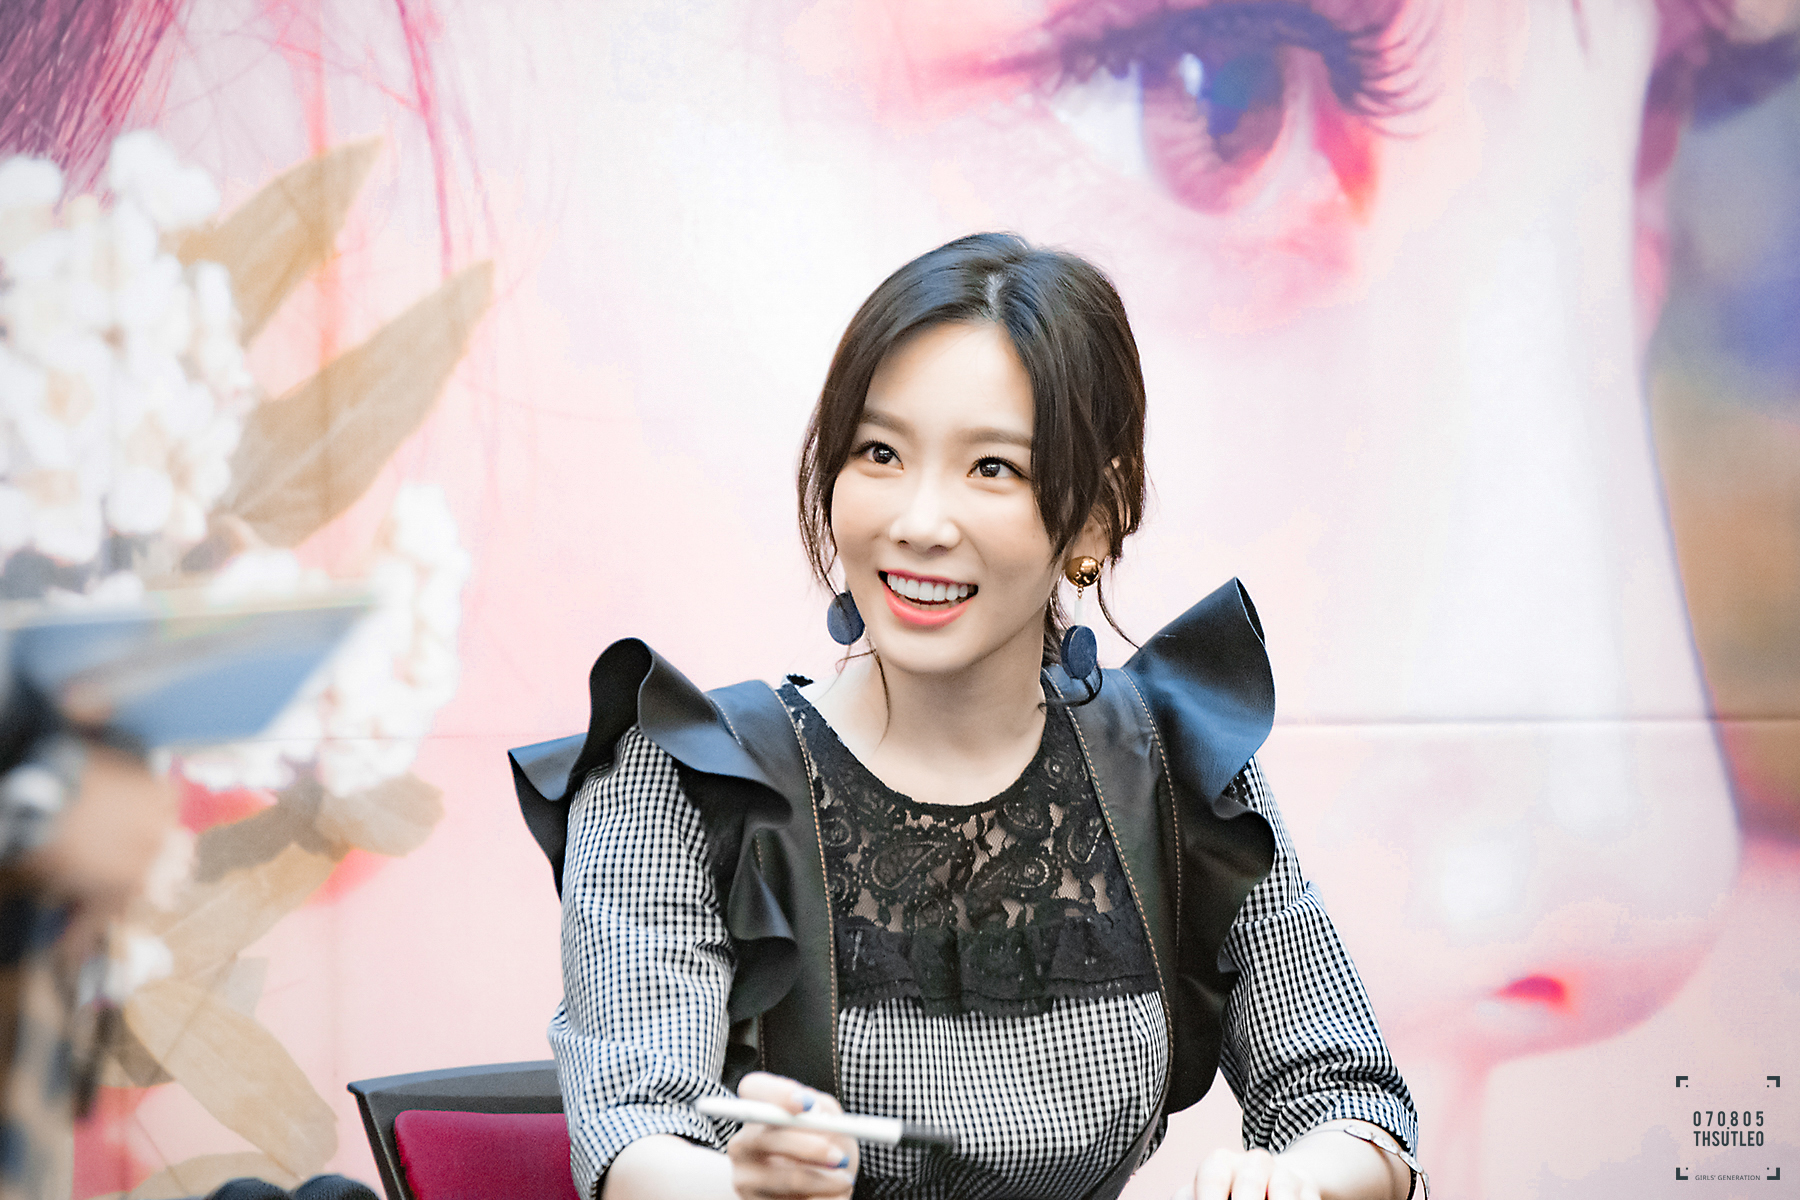 [PIC][16-04-2017]TaeYeon tham dự buổi Fansign cho “MY VOICE DELUXE EDITION” tại AK PLAZA vào chiều nay  - Page 3 2555A93658F4DD4310DFF6